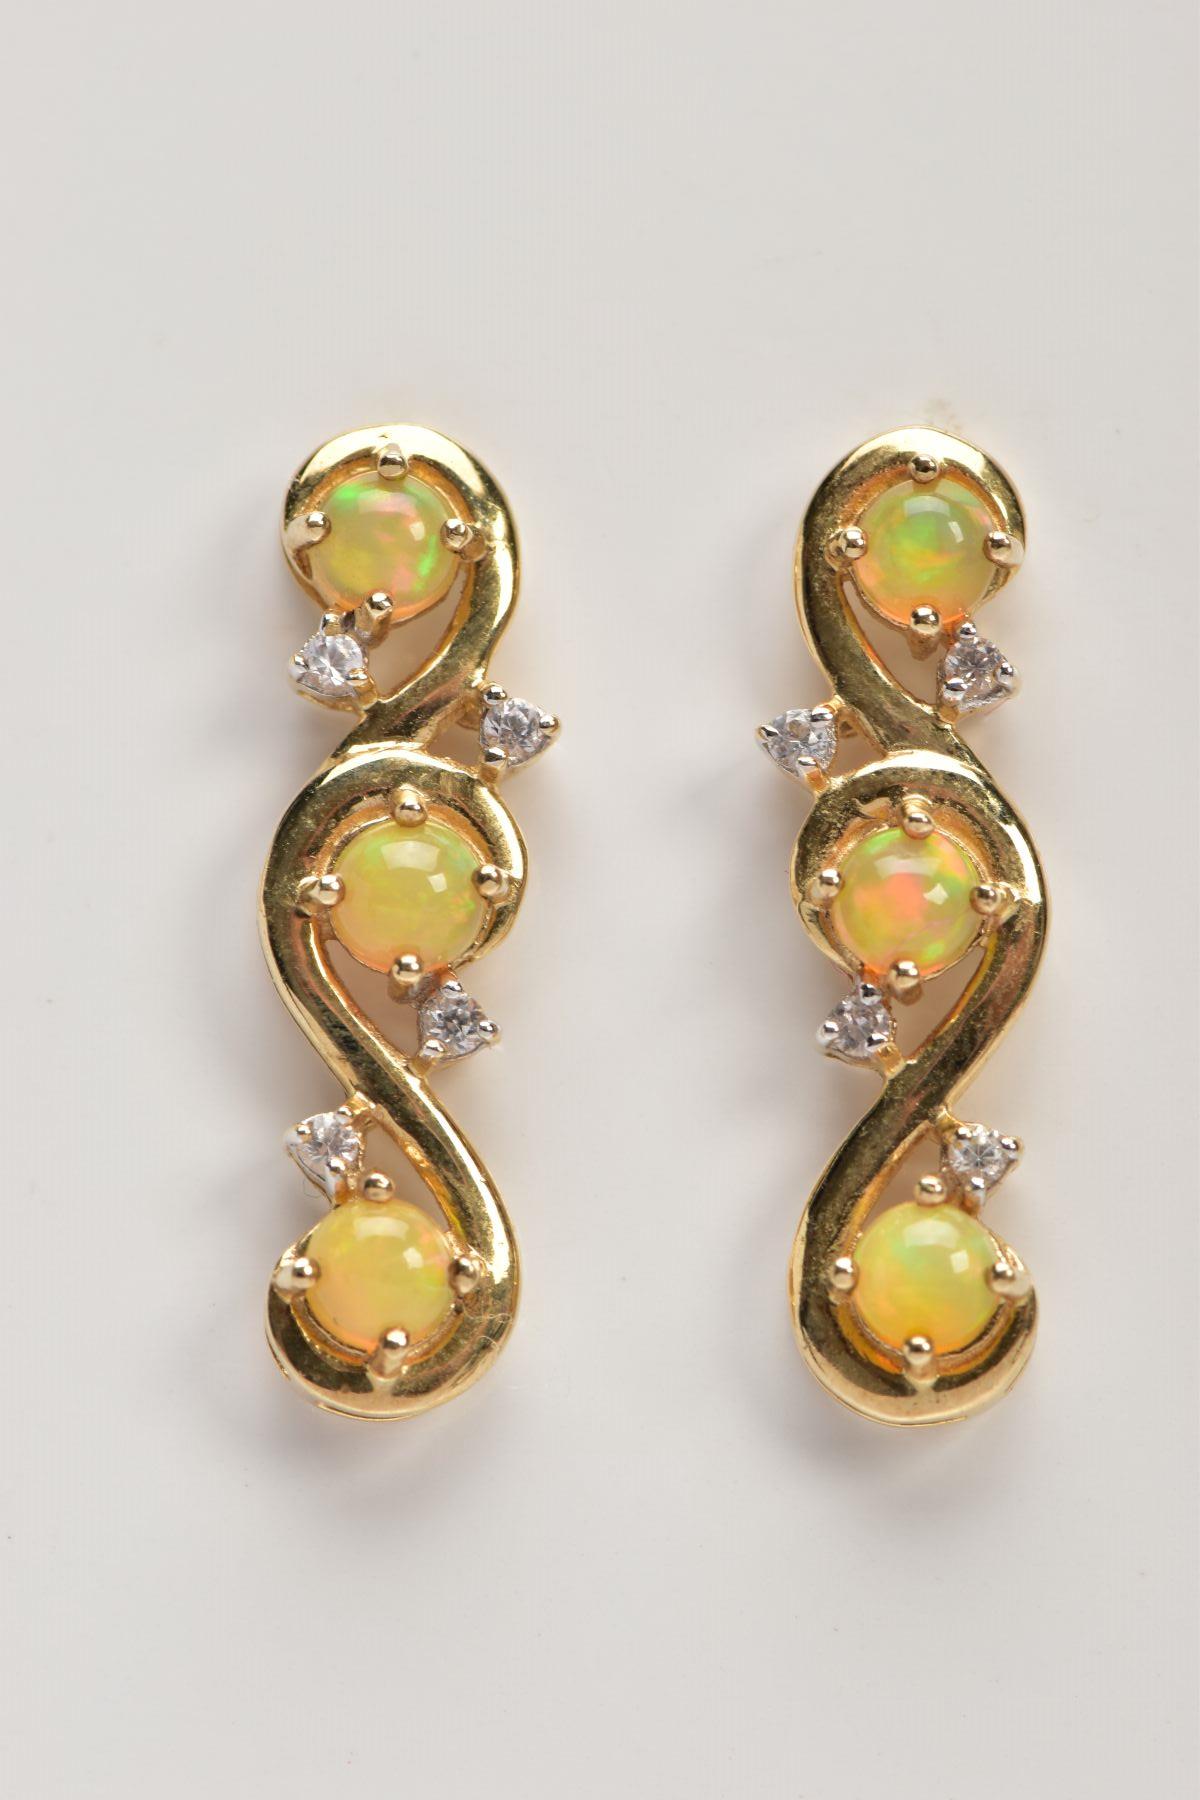 A PAIR OF 9CT GOLD, OPAL DROP EARRINGS, each drop set with three circular opal cabochons, and four